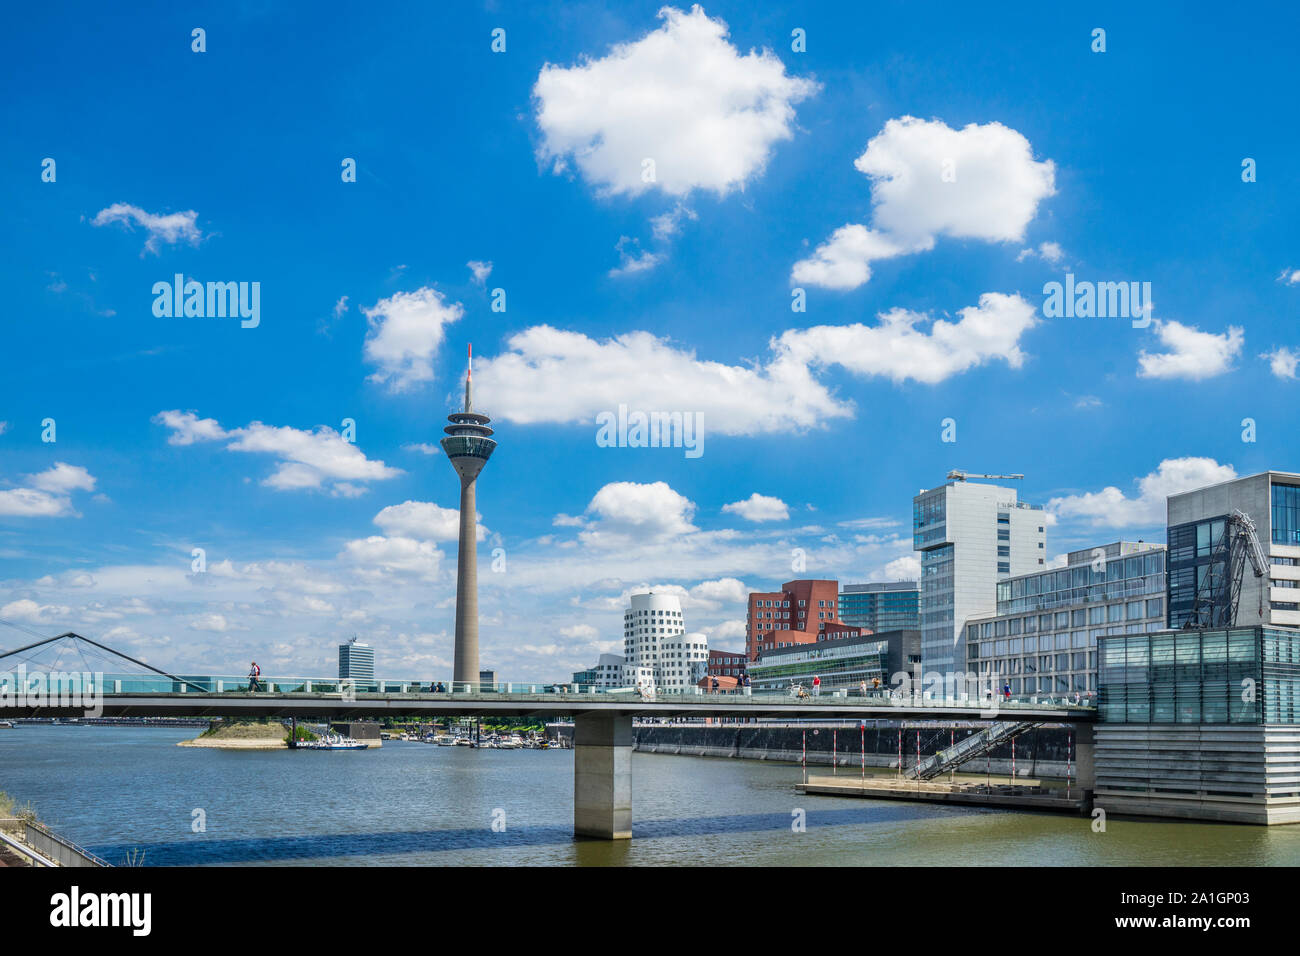 Media Harbour Düsseldorf with view of the Neuer Zollhof buildings and its postmodern architecture of the Gerry buildings, the pedestrian bridge and th Stock Photo